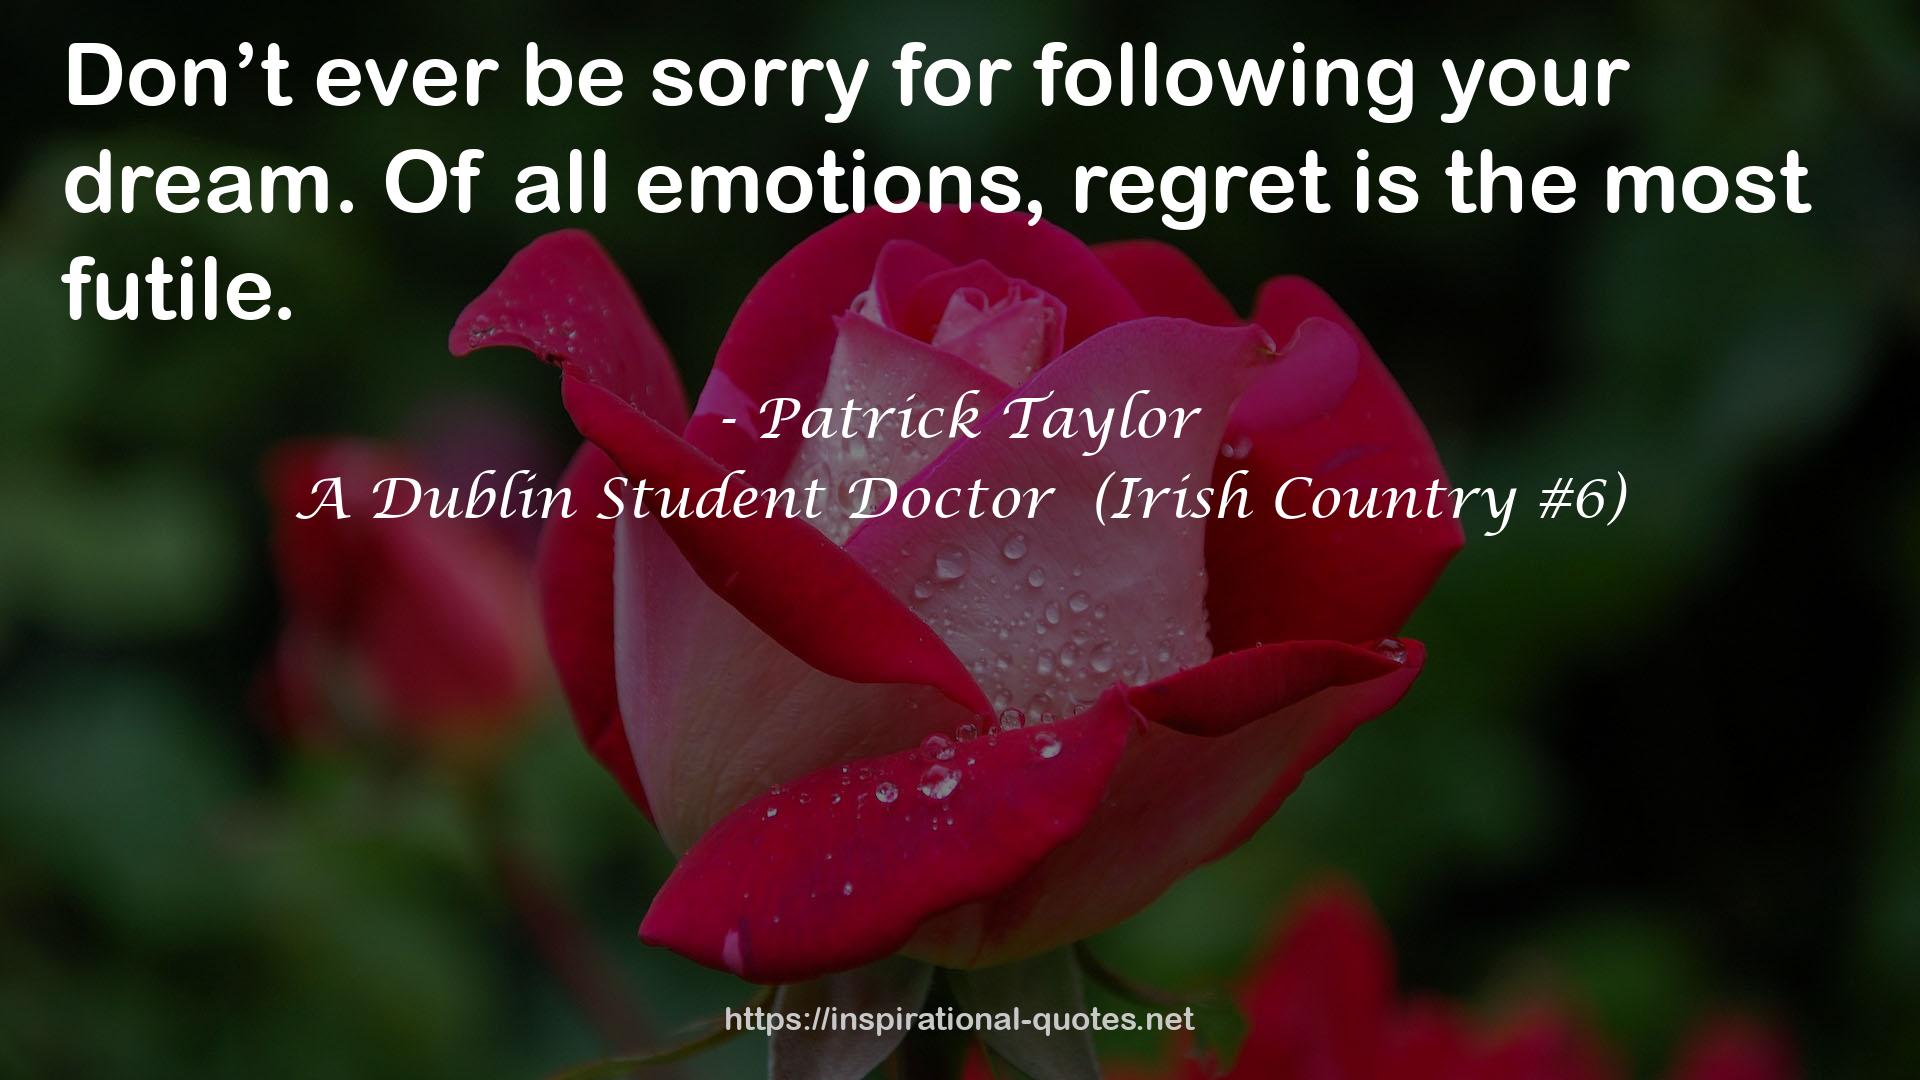 A Dublin Student Doctor  (Irish Country #6) QUOTES